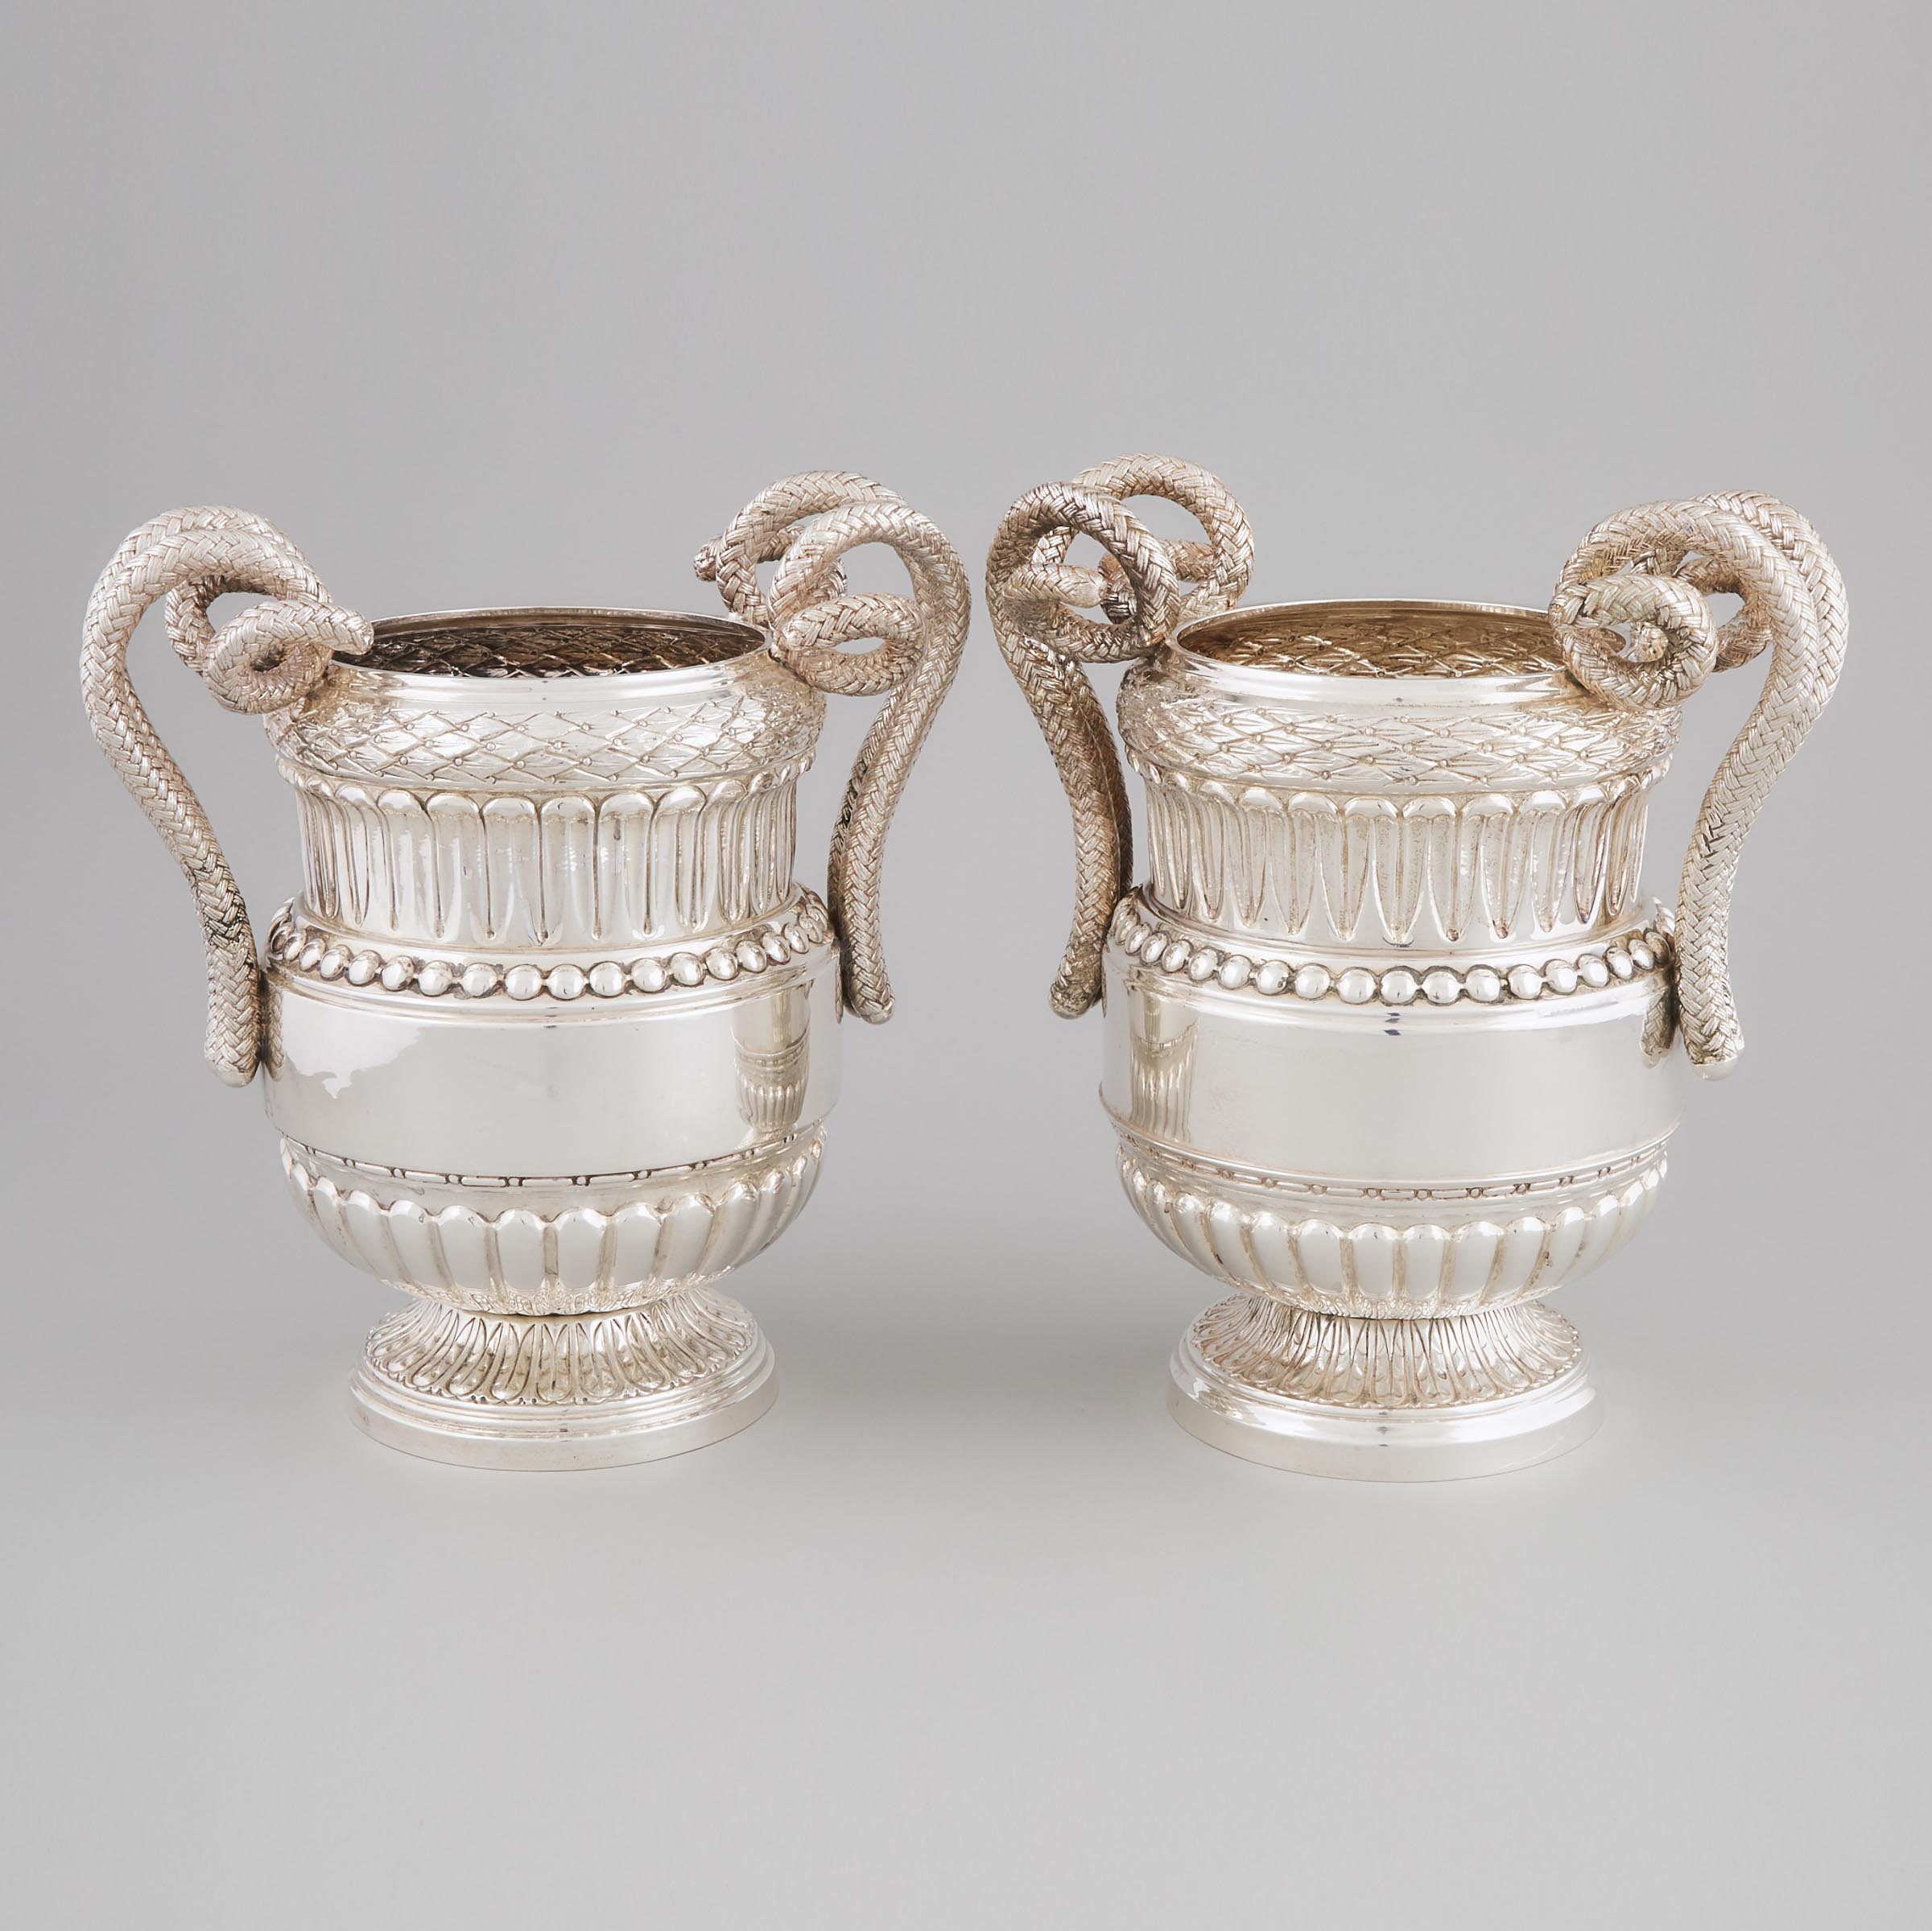 Pair of Middle-Eastern Silver Wine Coolers, 20th century